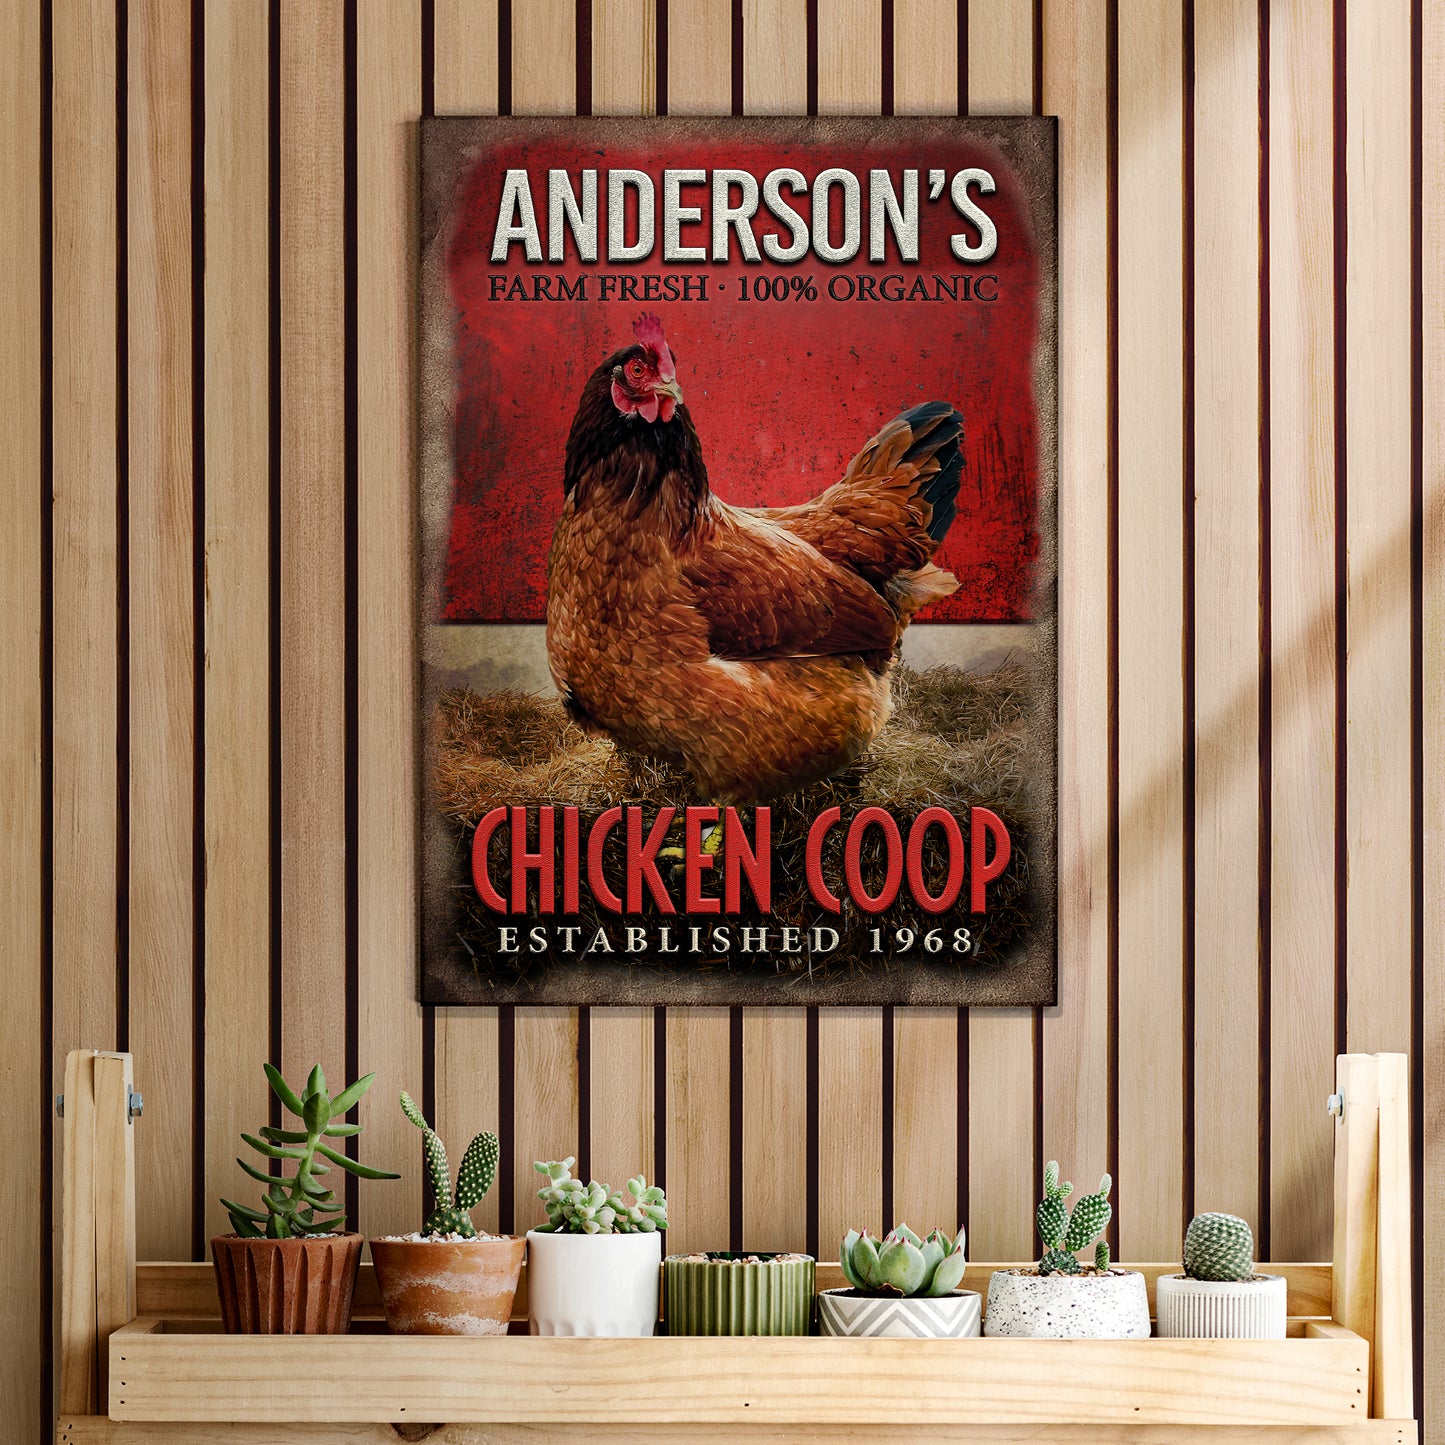 Chicken Coop Farm Fresh Organic Sign Style 2 - Image by Tailored Canvases